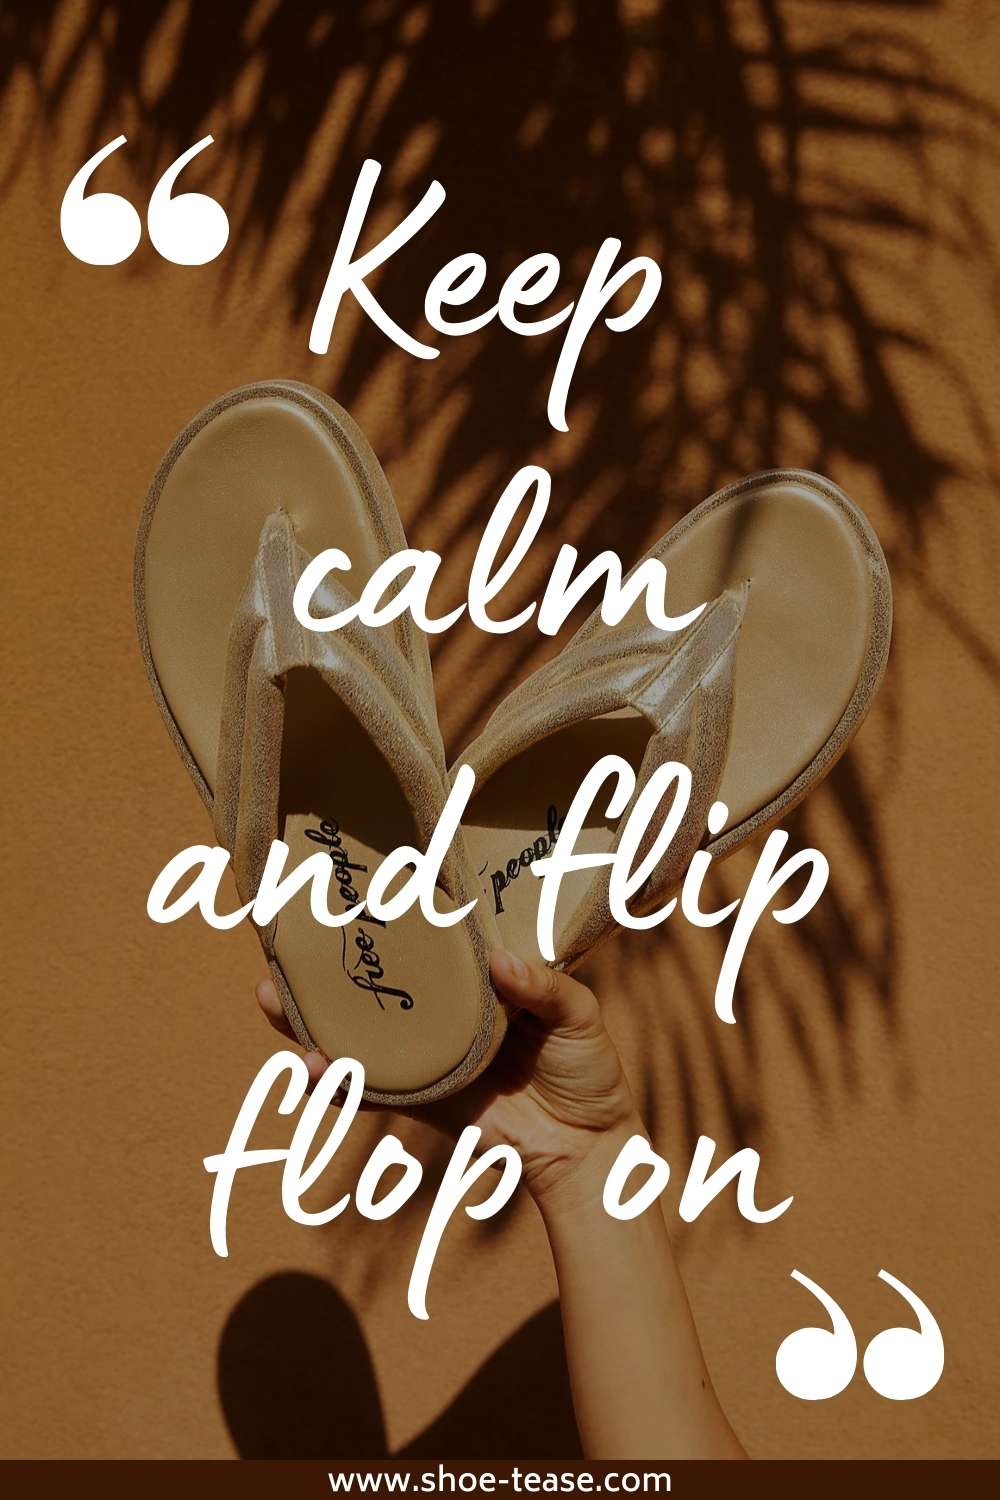 Flip flop quote reading keep calm and flip flop on over image of woman holding flip flops over palm tree shadow.